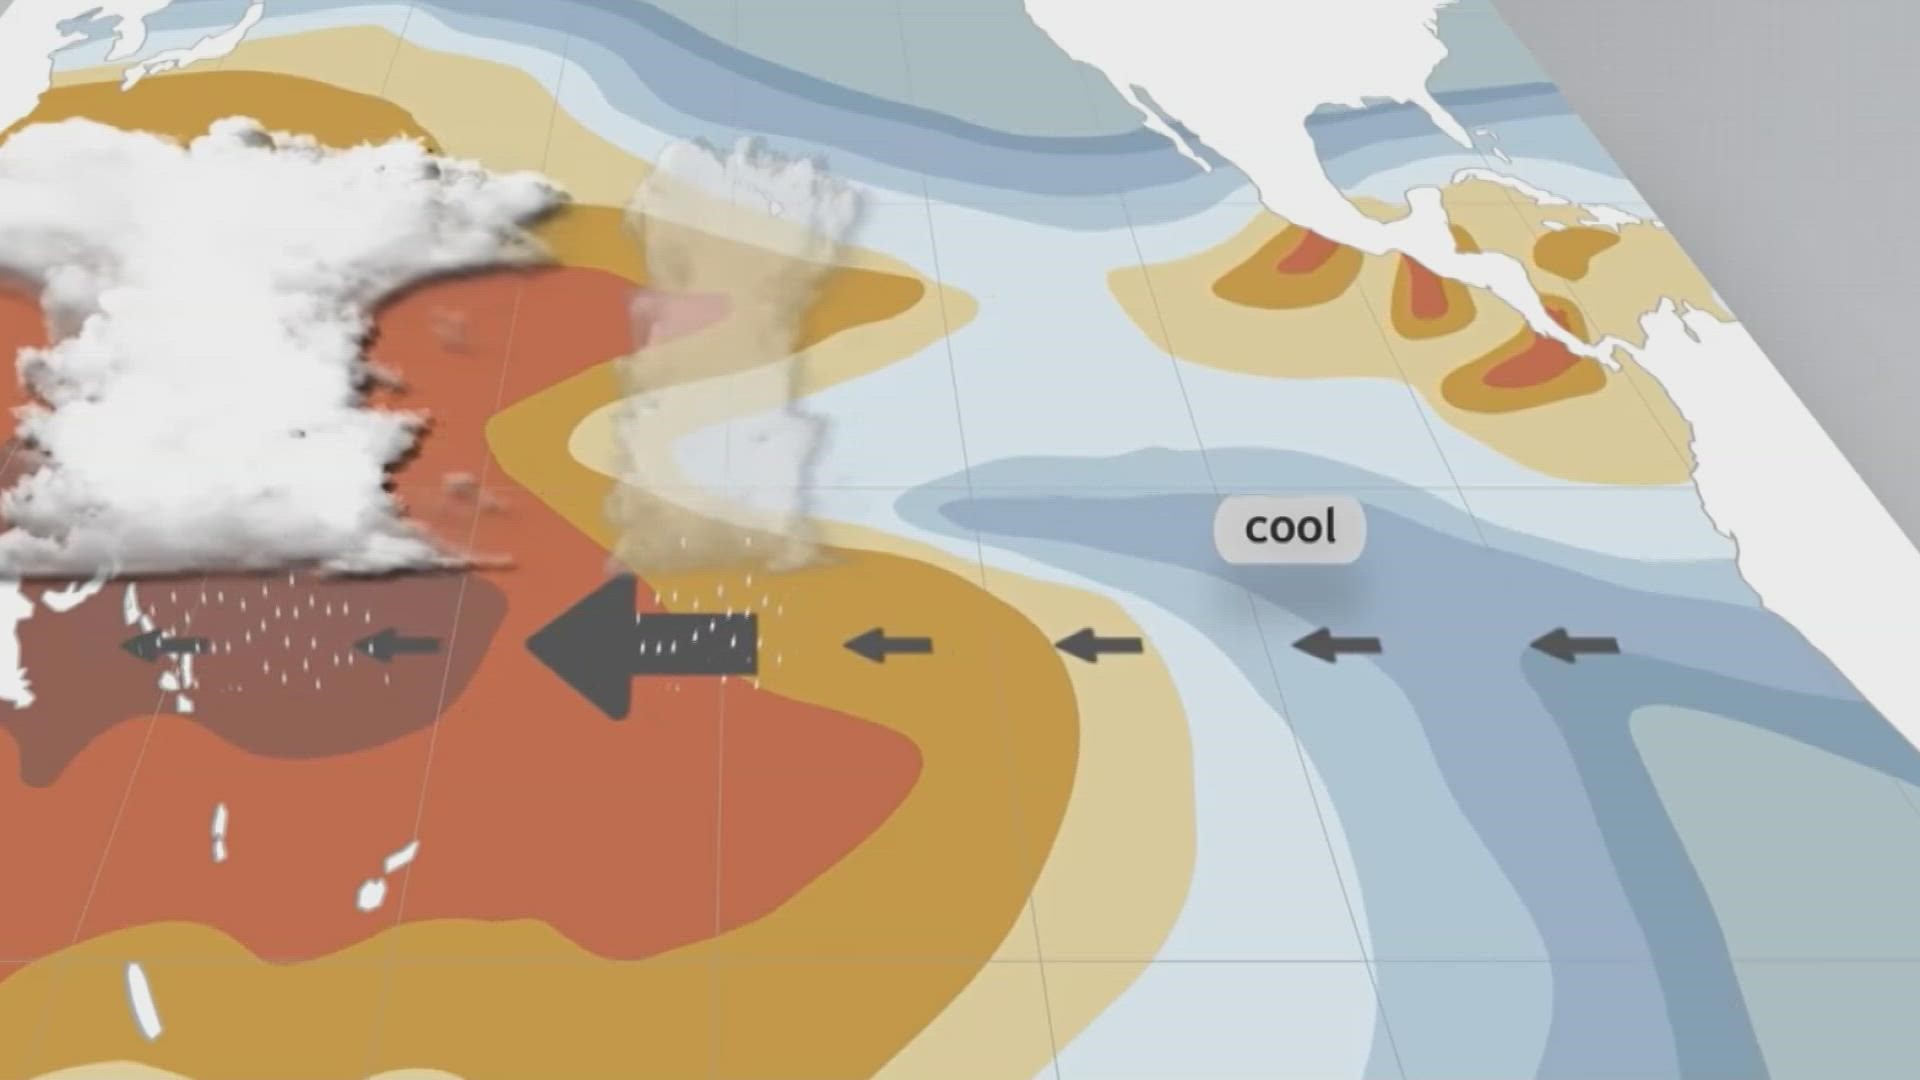 Cory Reppenhagen explains what happens when the cool  meets the warming of climate change.